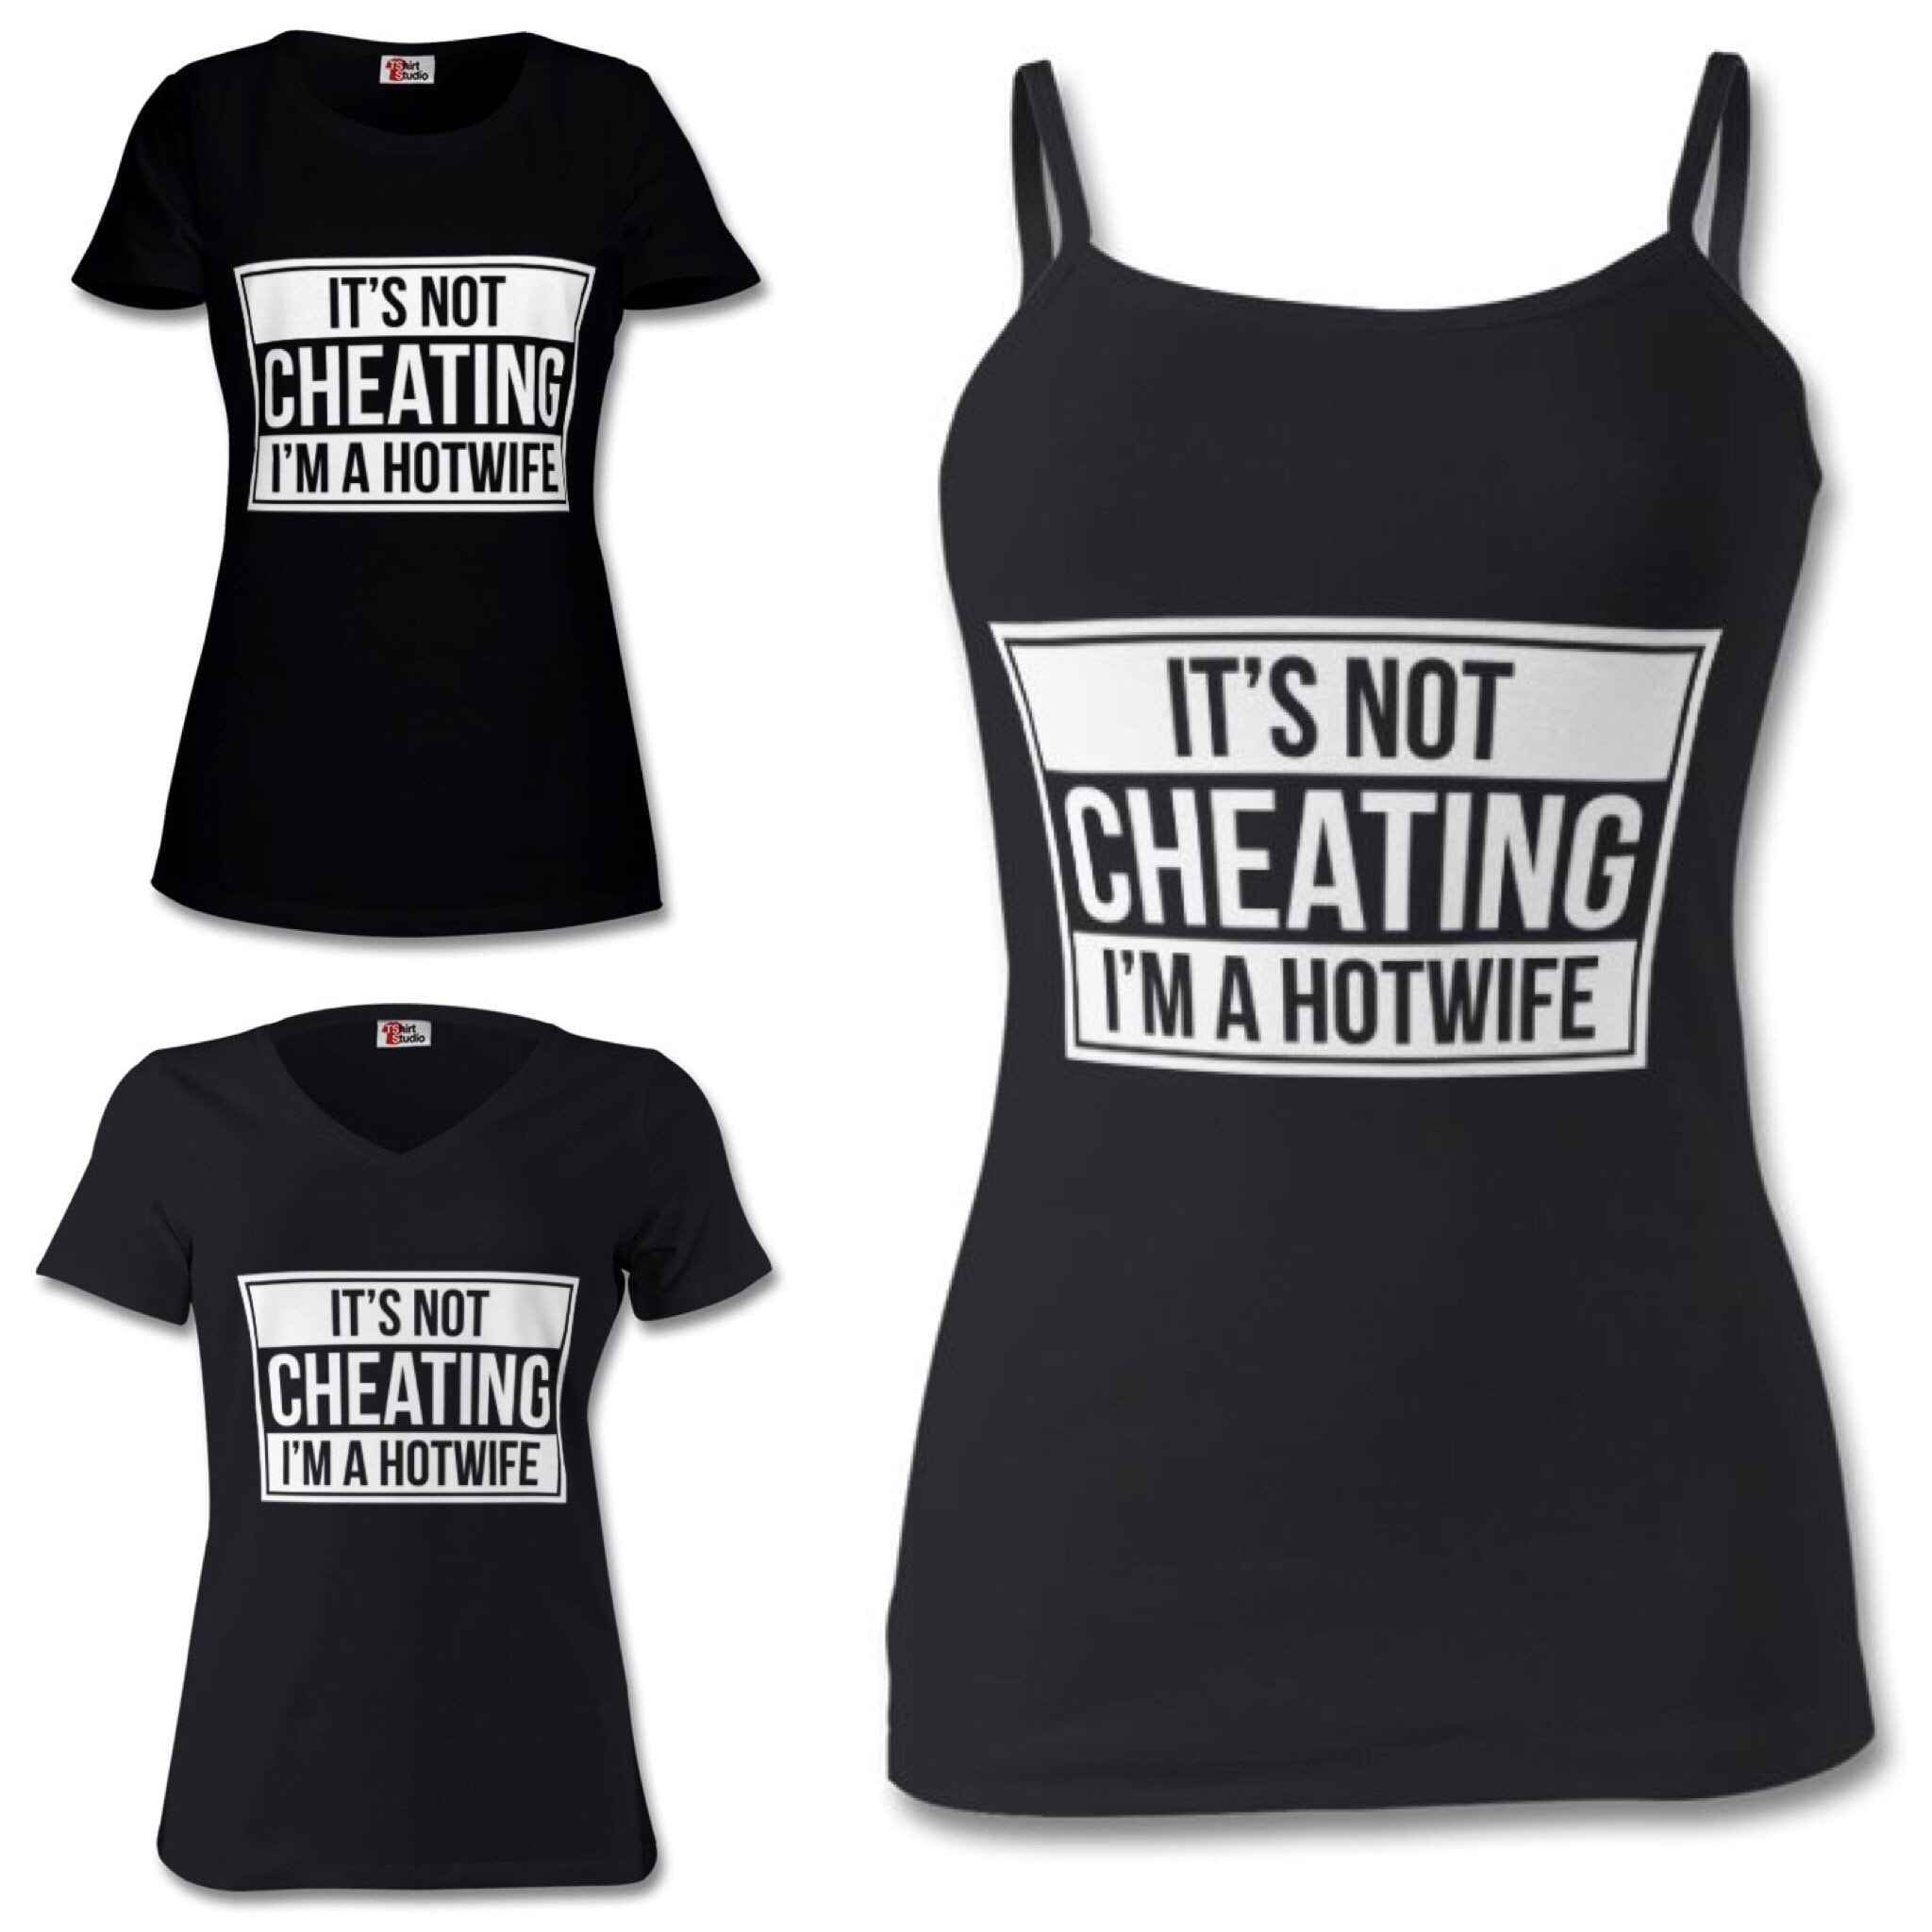 Its Not Cheating Im a Hotwife T-shirts pic